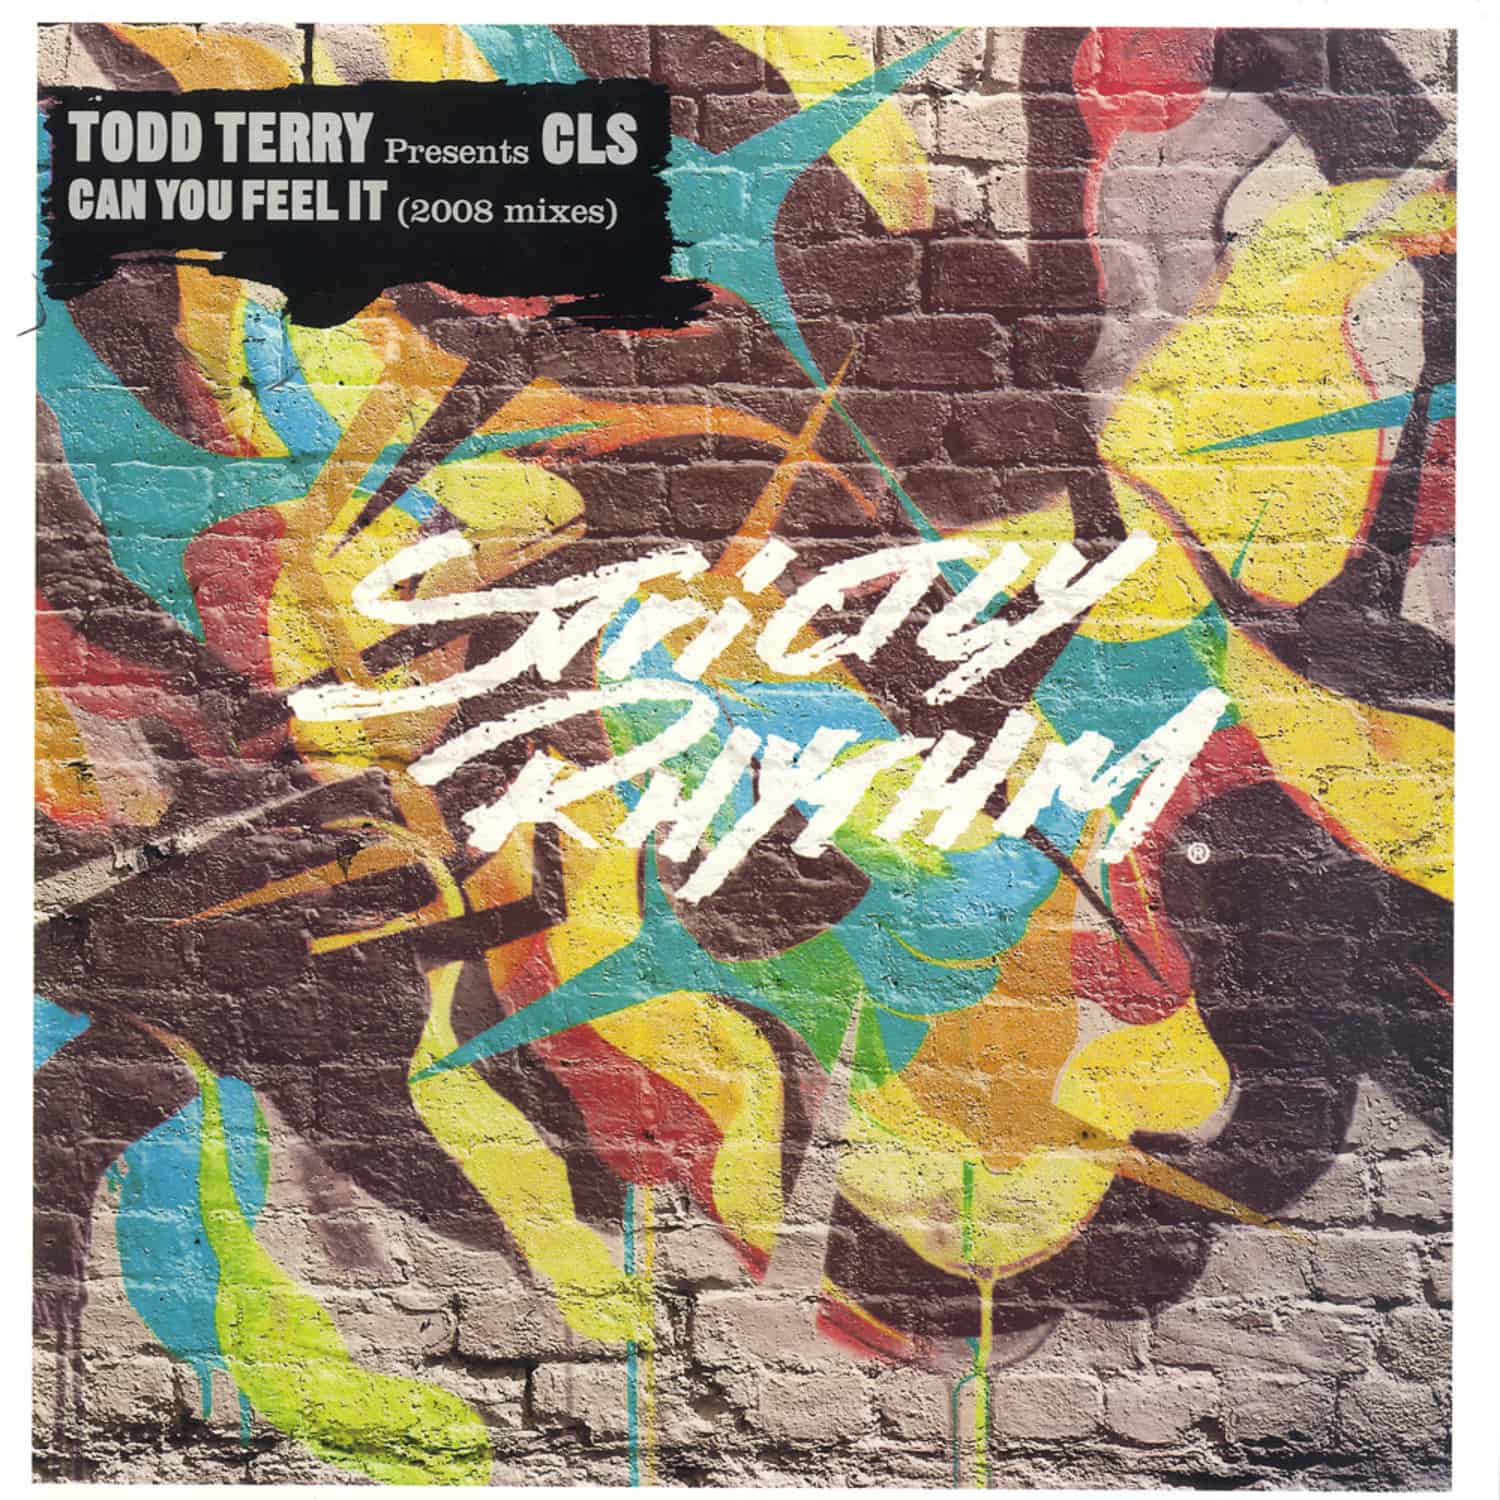 Todd Terry presents CLS - CAN YOU FEEL IT 2008